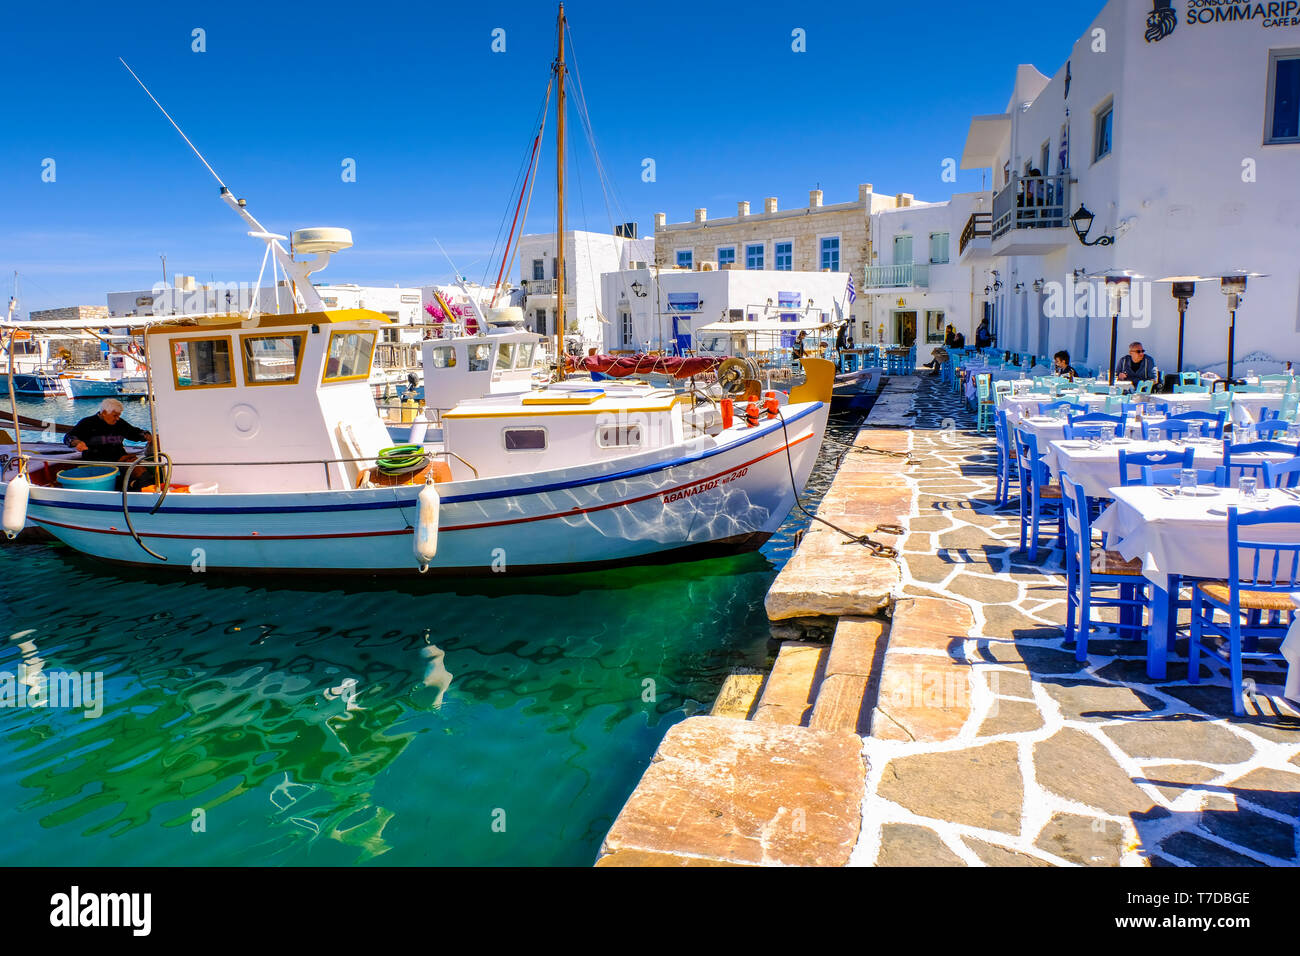 Fishboat and restaurant tables on the harbour. Stock Photo